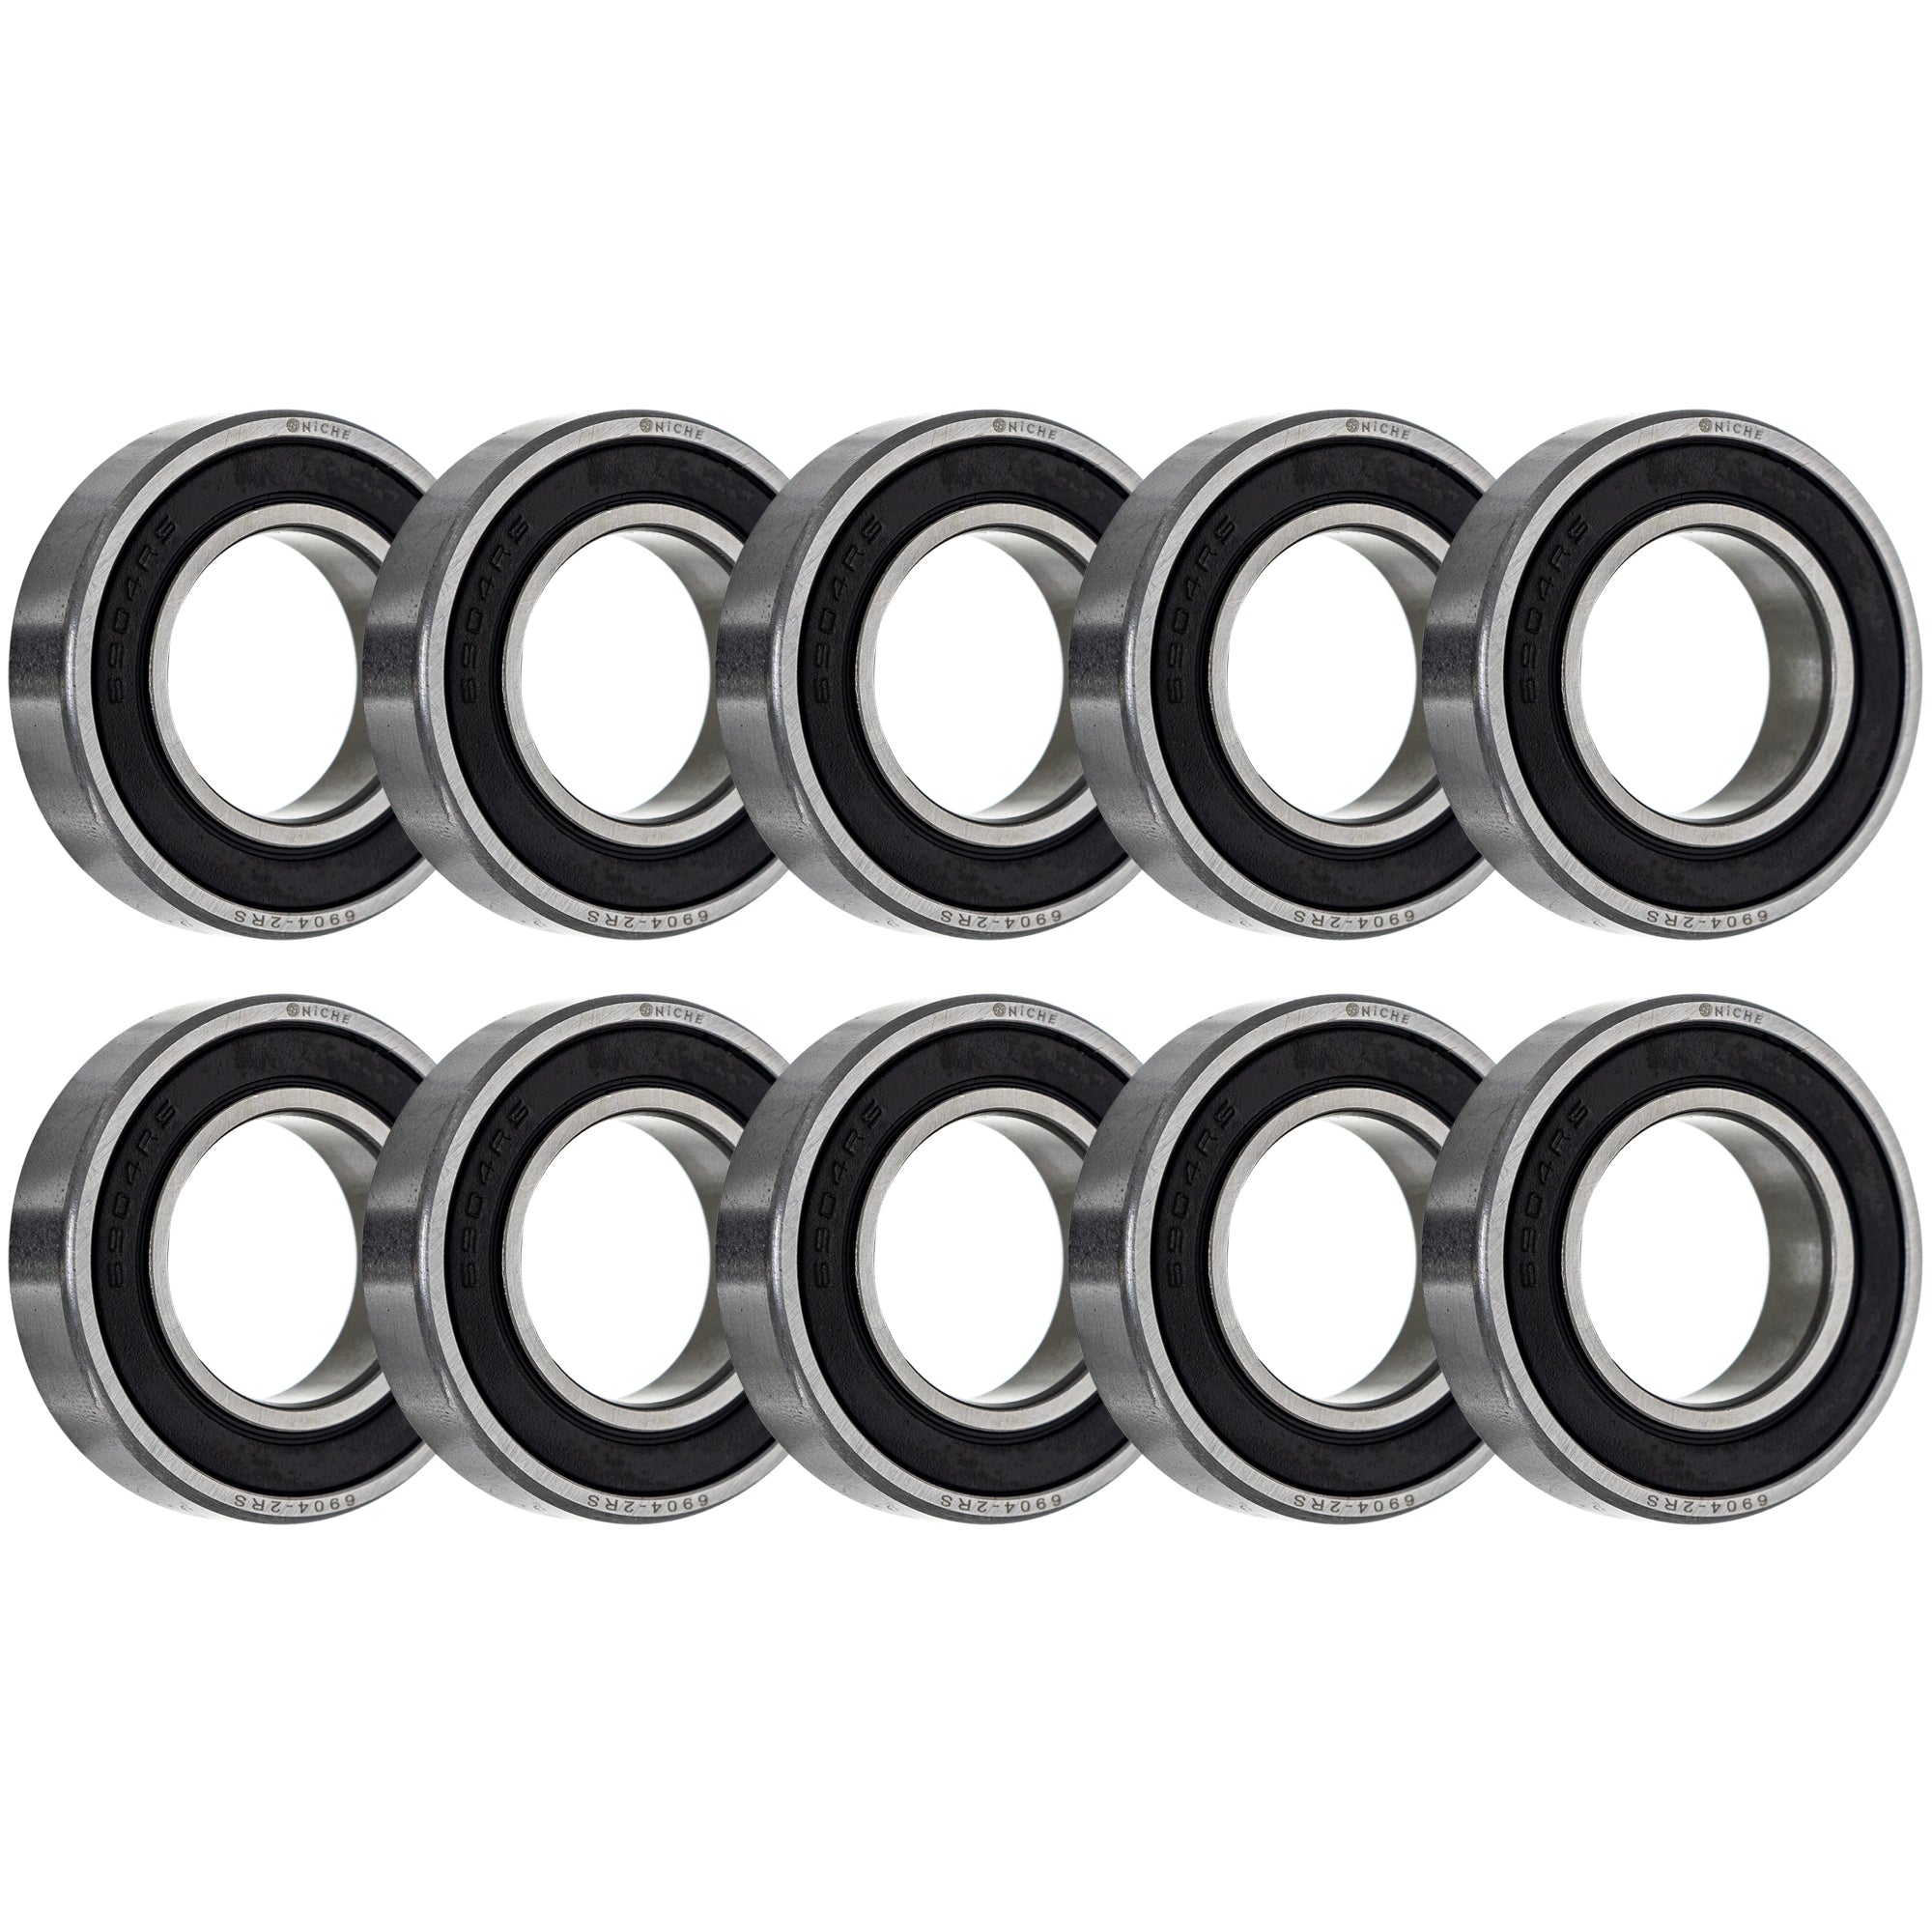 Single Row, Deep Groove, Ball Bearing Pack of 10 10-Pack for zOTHER YZ450F YZ426F YZ400F NICHE 519-CBB2258R